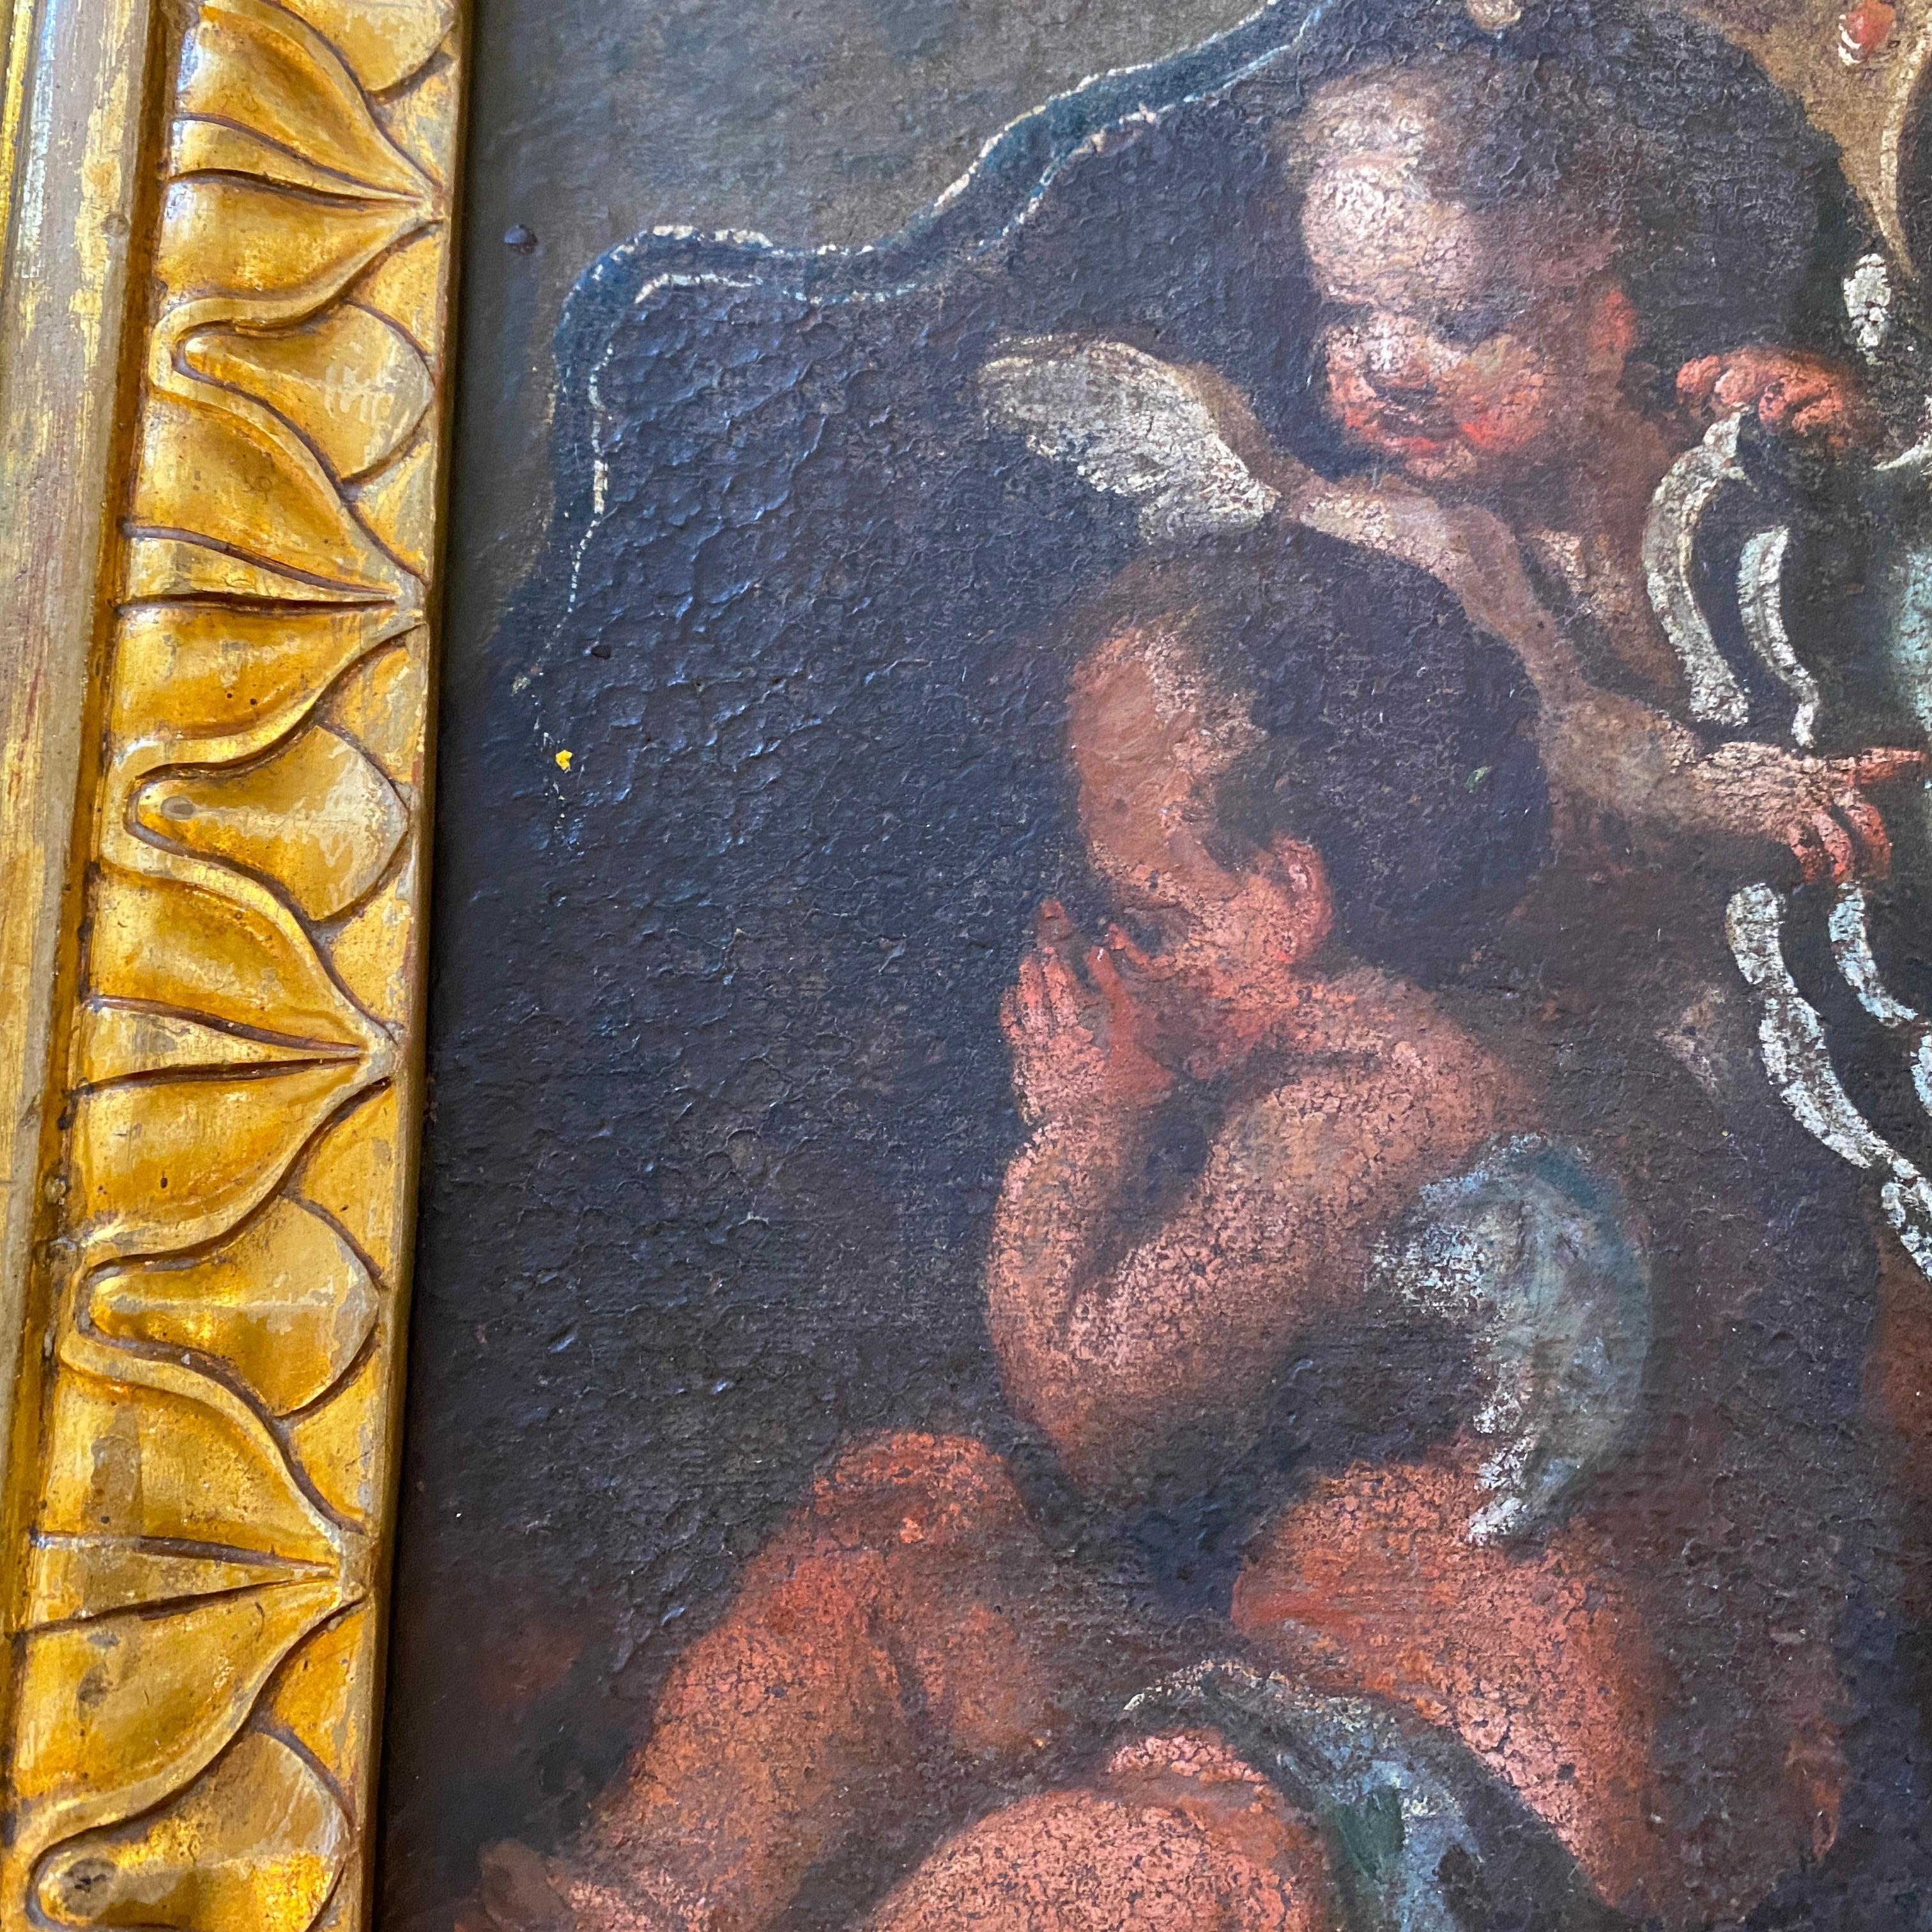 Canvas 17th Century Italian Painting Fragment of Angels with a Noble Coat of Arms